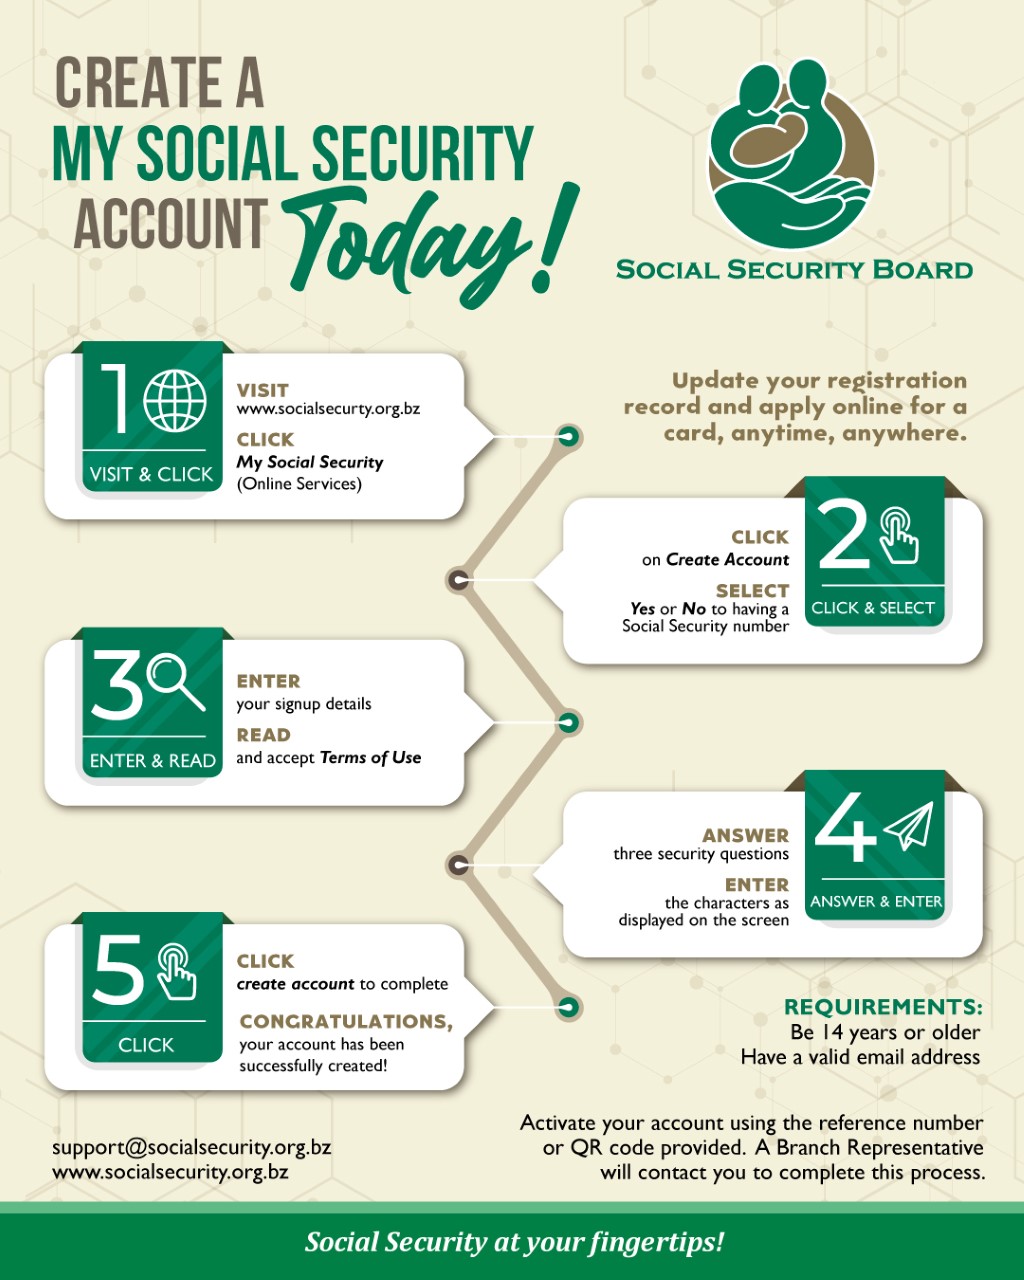 Social Security Board - Fax Section